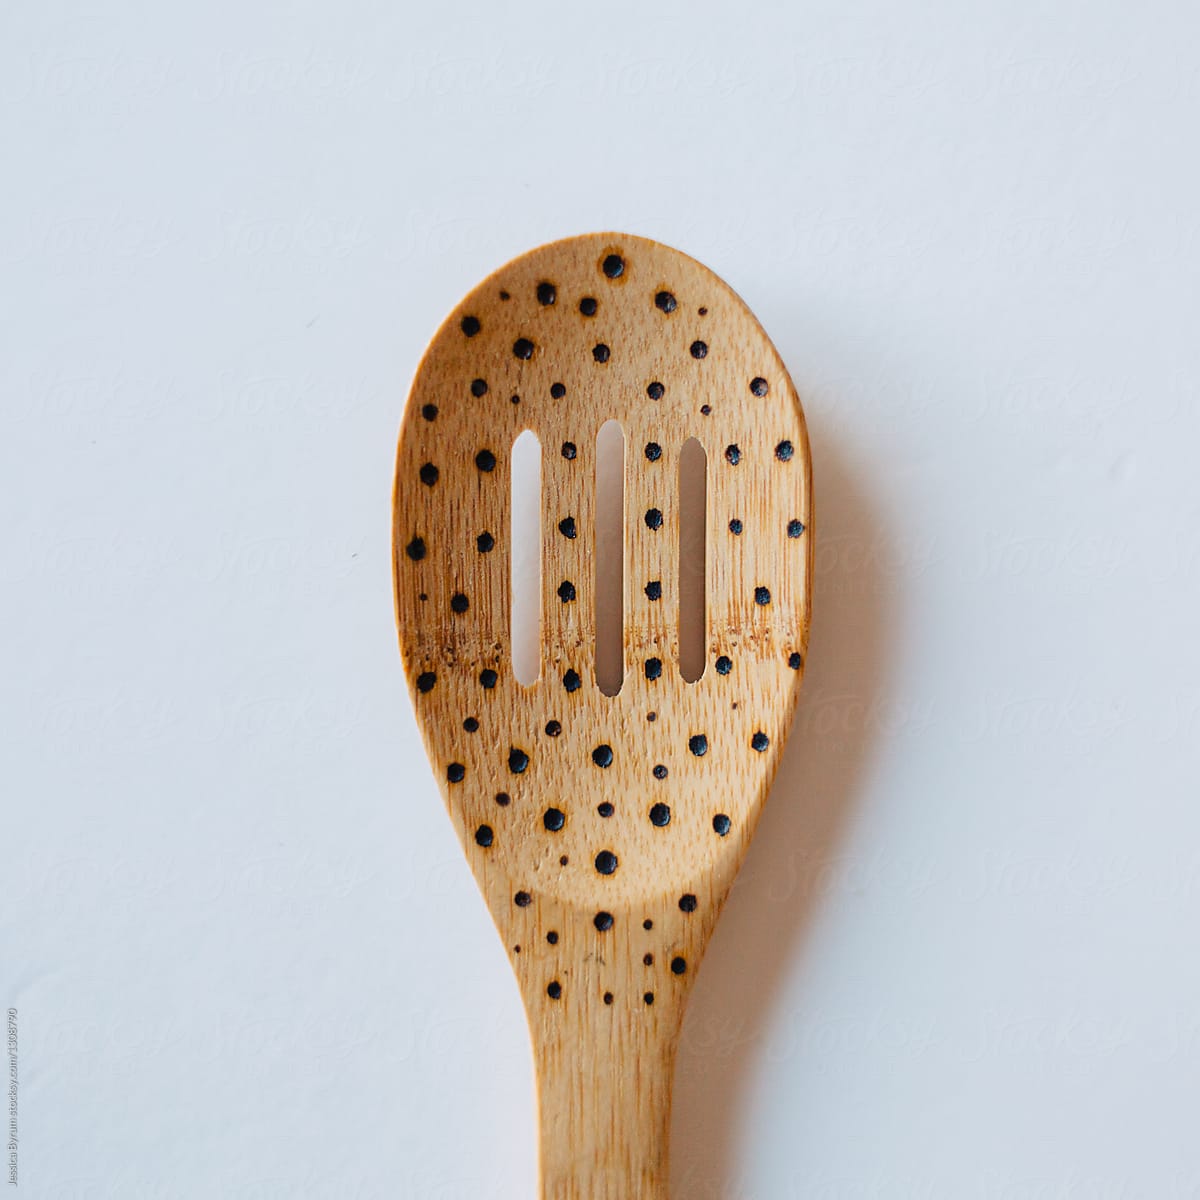 Wood burned bamboo wooden spoons on white background.